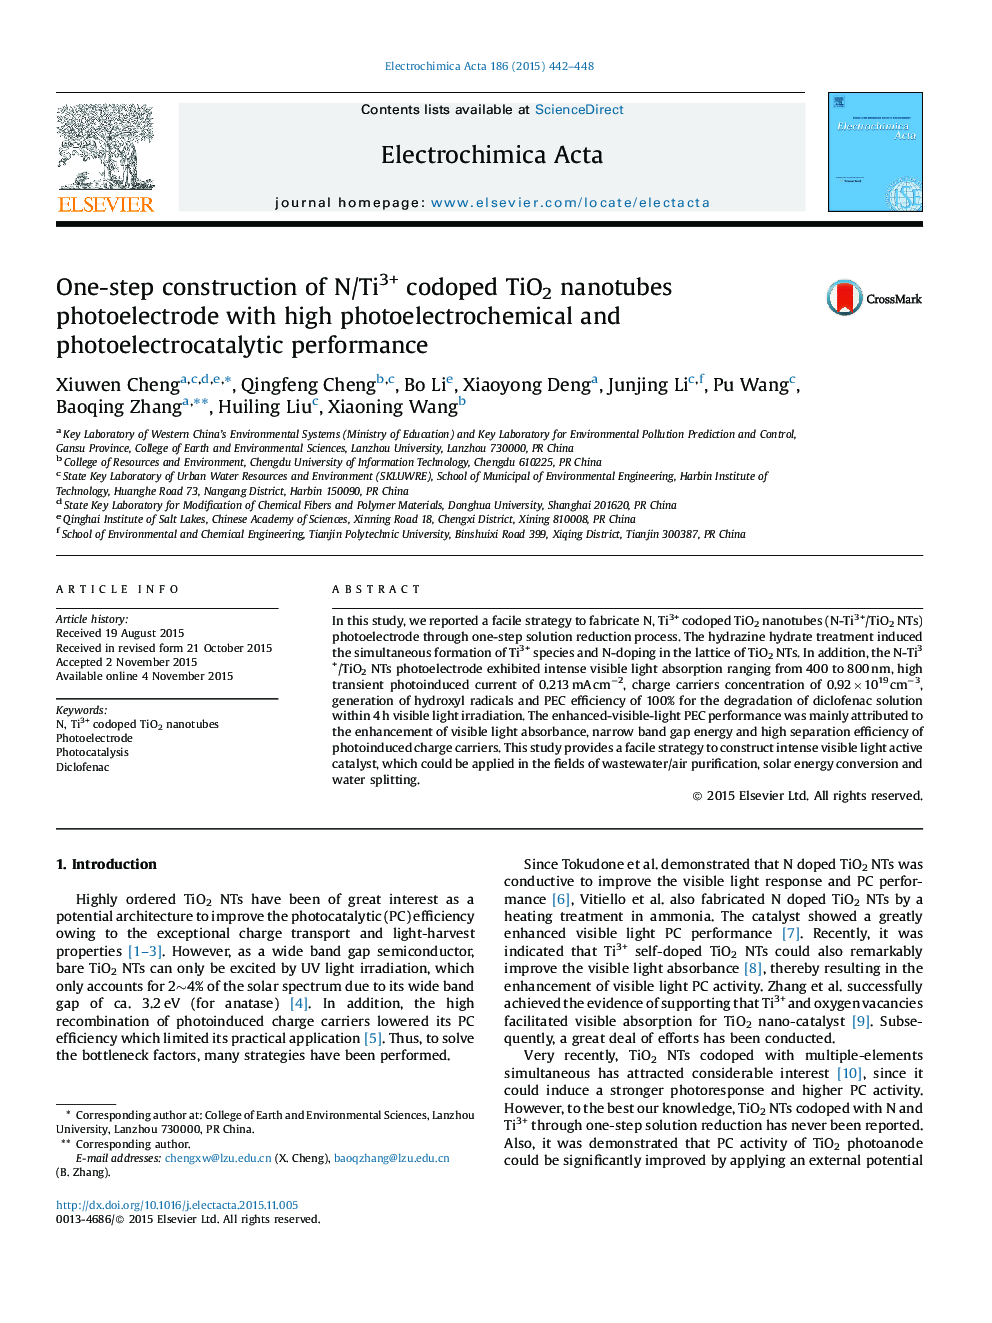 One-step construction of N/Ti3+ codoped TiO2 nanotubes photoelectrode with high photoelectrochemical and photoelectrocatalytic performance